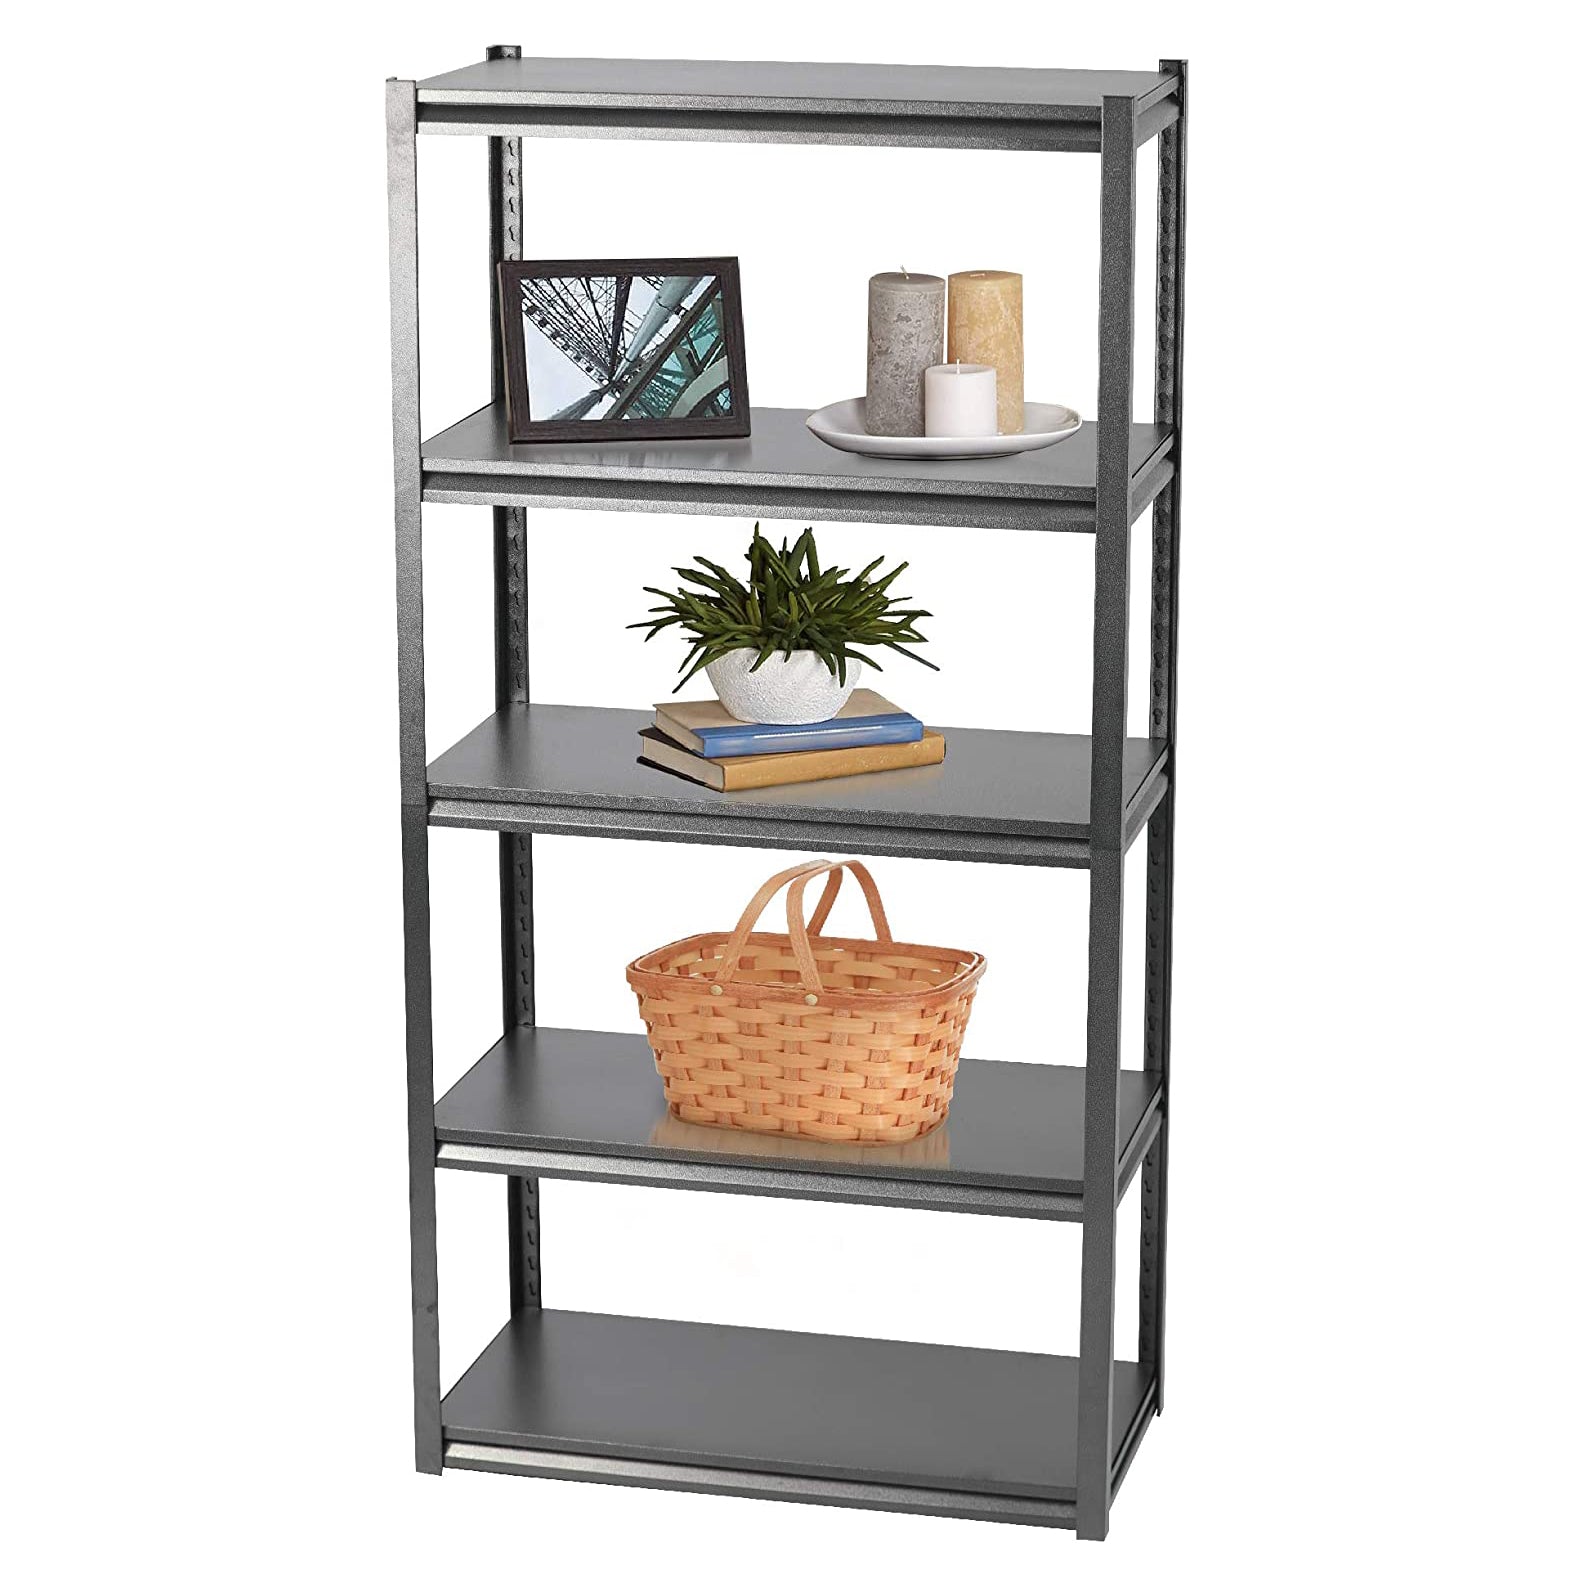 4 Tiers Adjustable Storage Shelf Rack Modern Style Bookcase Display Stand and Storage Tower,Black